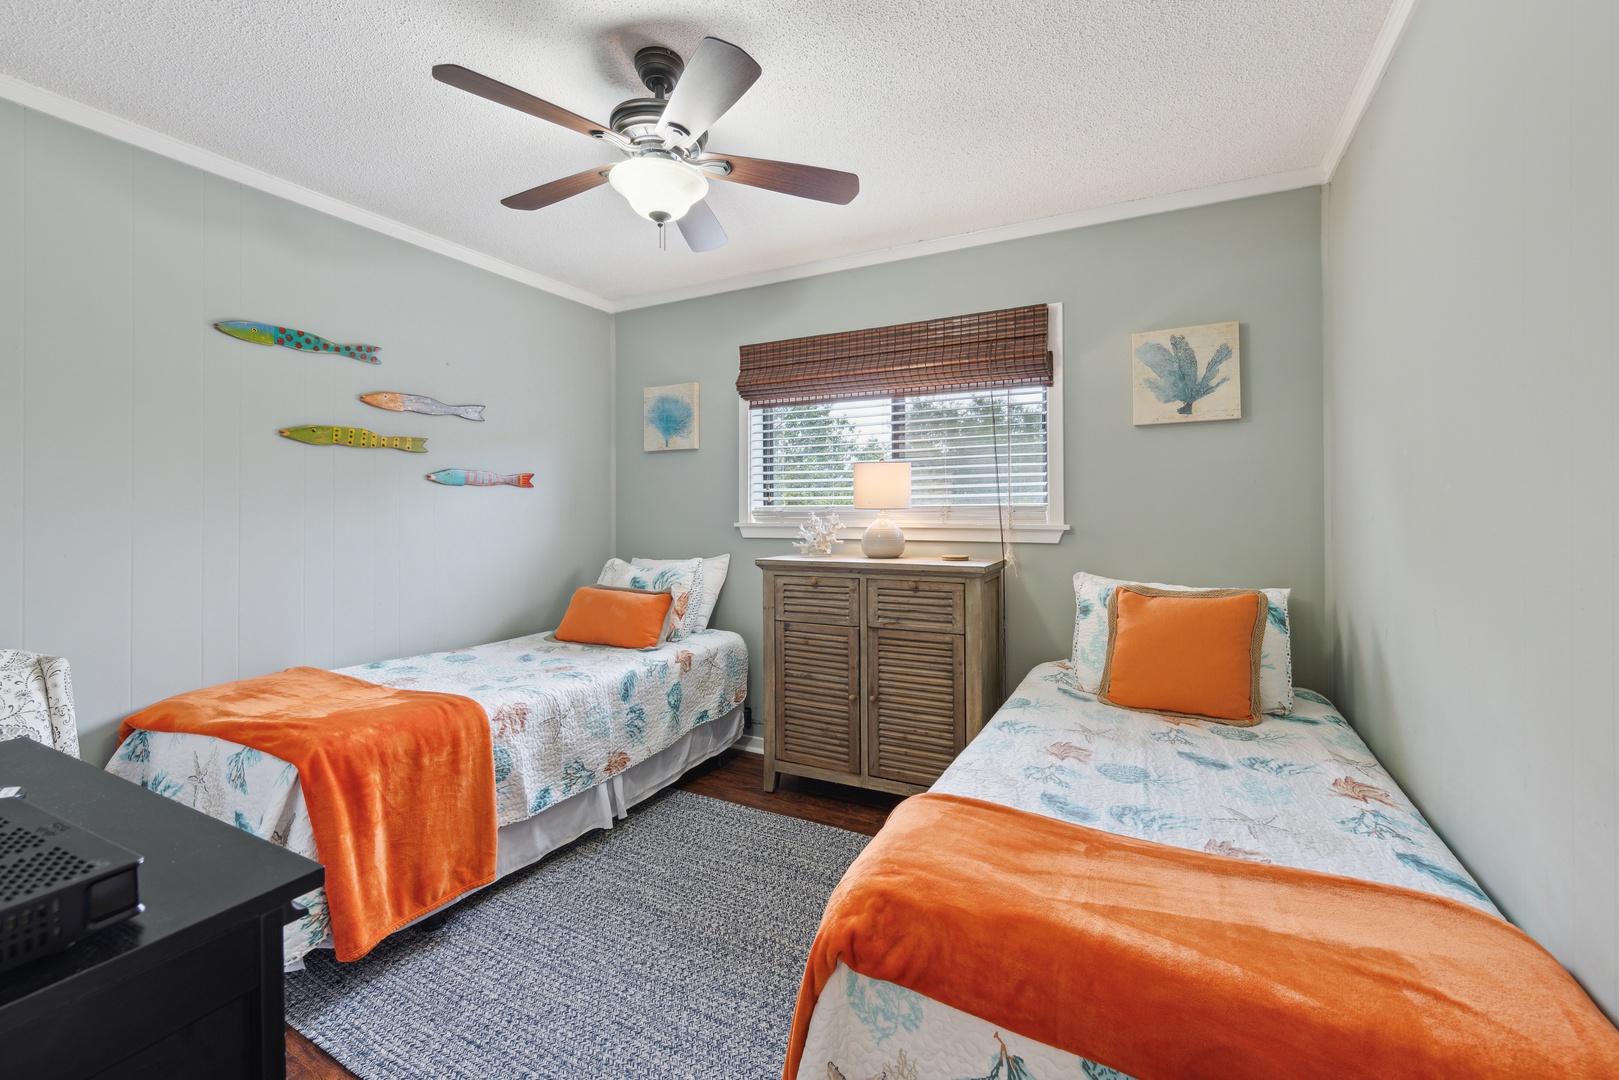 The 2nd comfy bedroom includes a pair of twin beds, TV, & ceiling fan